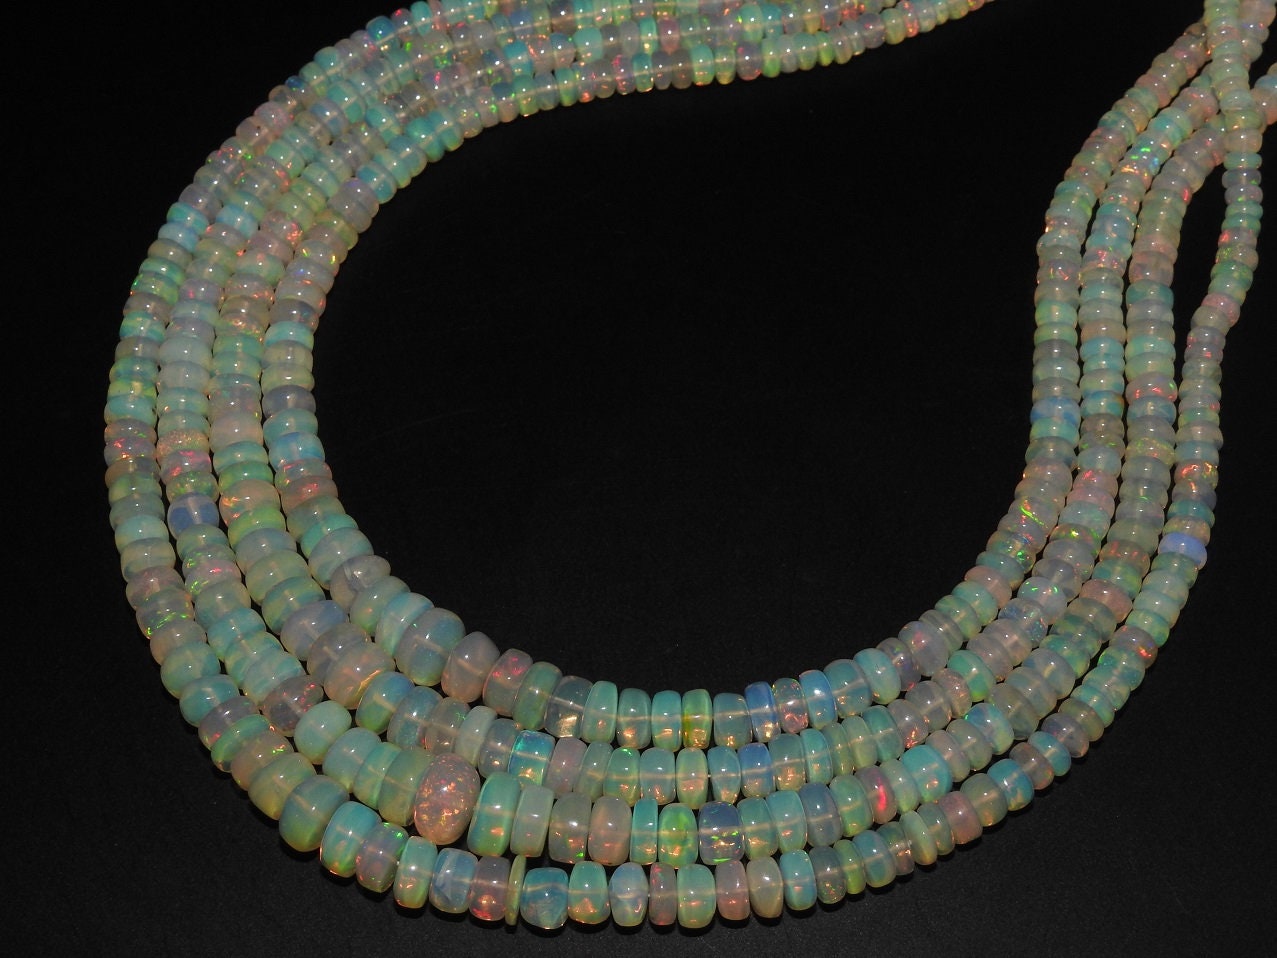 Natural Ethiopian Opal Smooth Roundel Beads,Multi Fire,Loose Stone 16Inch Strand 3X2To7X4MM Approx,Wholesale Price,New Arrival (pme) EO2 | Save 33% - Rajasthan Living 17